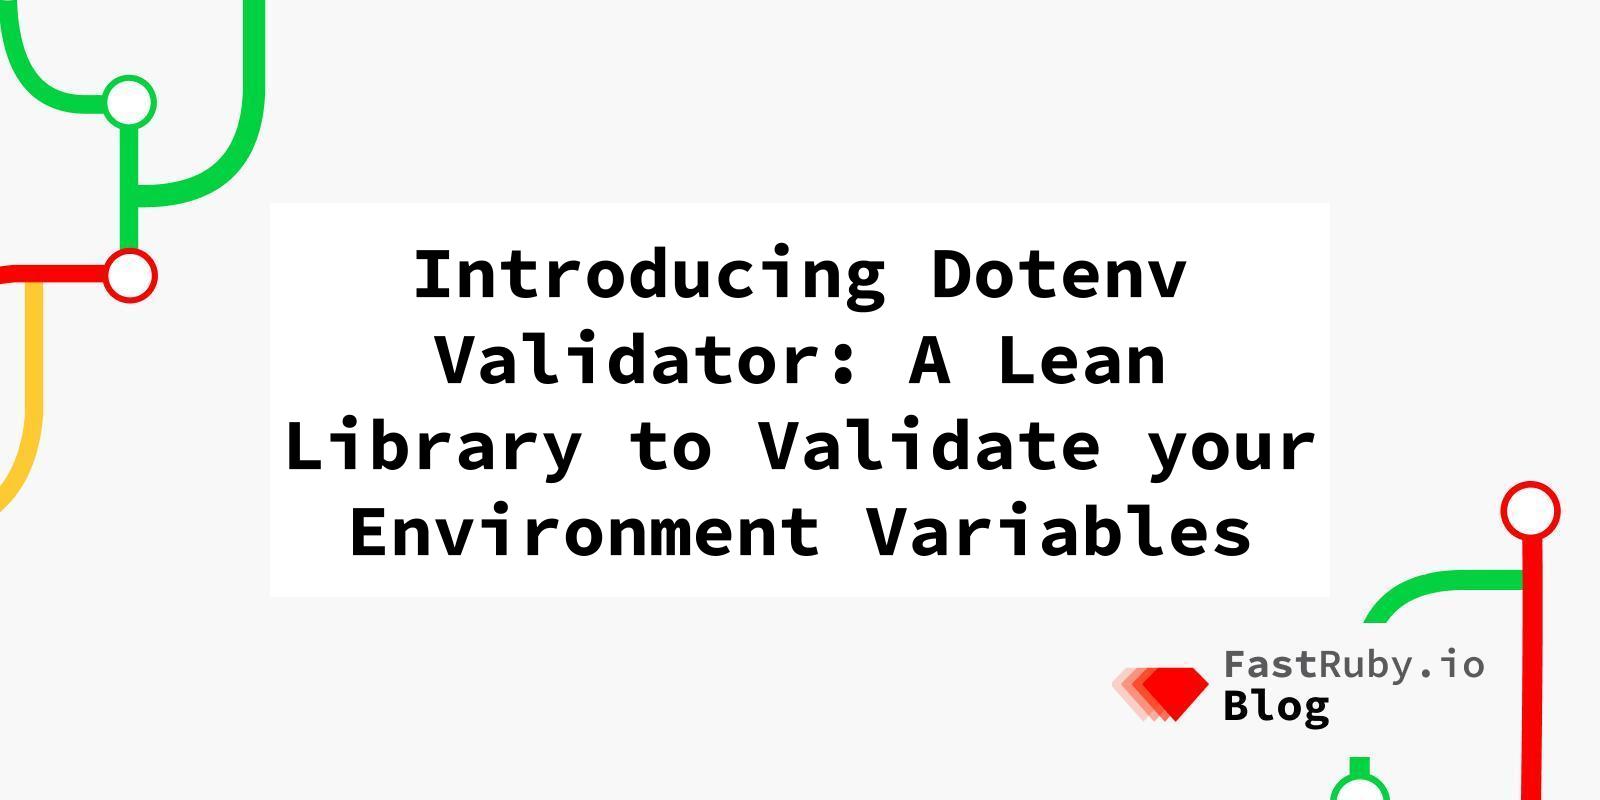 Introducing Dotenv Validator: A Lean Library to Validate your Environment Variables